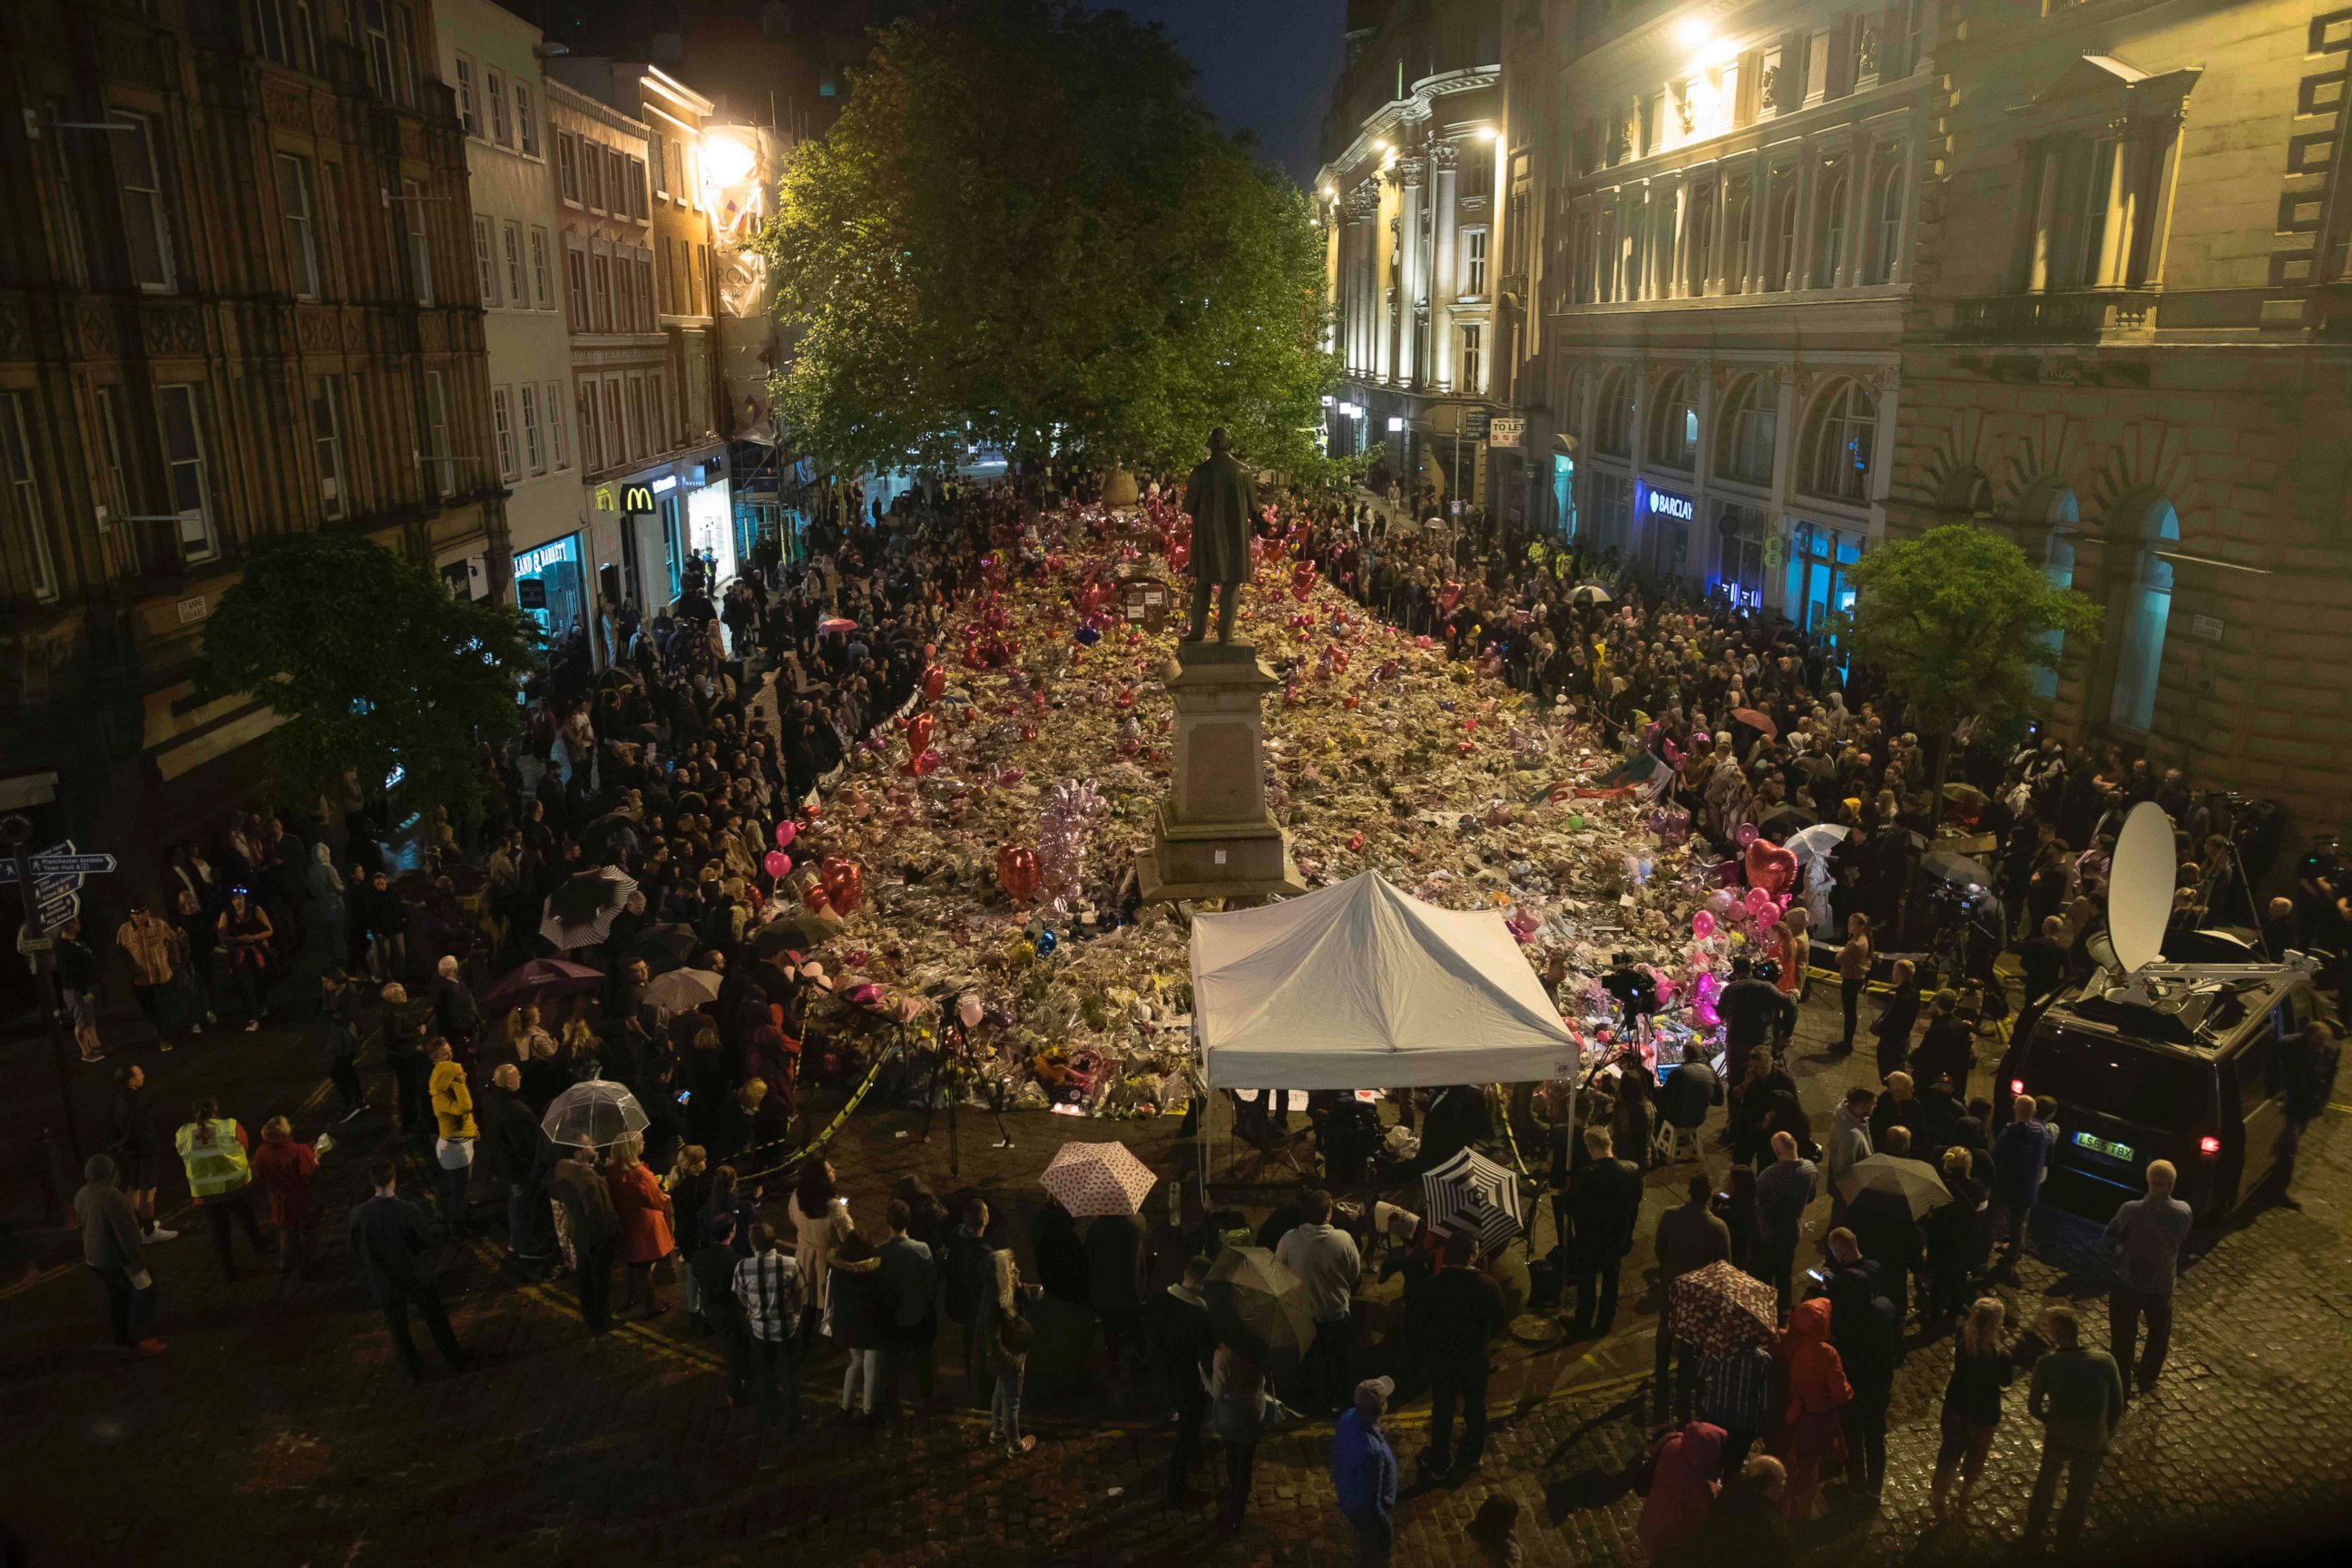 PHOTO: Members of the public take part in a vigil on St. Ann's Square in Manchester, northwest England on May 29, 2017, exactly one week after a bomb attack at Manchester Arena killed 22 and injured dozens more. 
